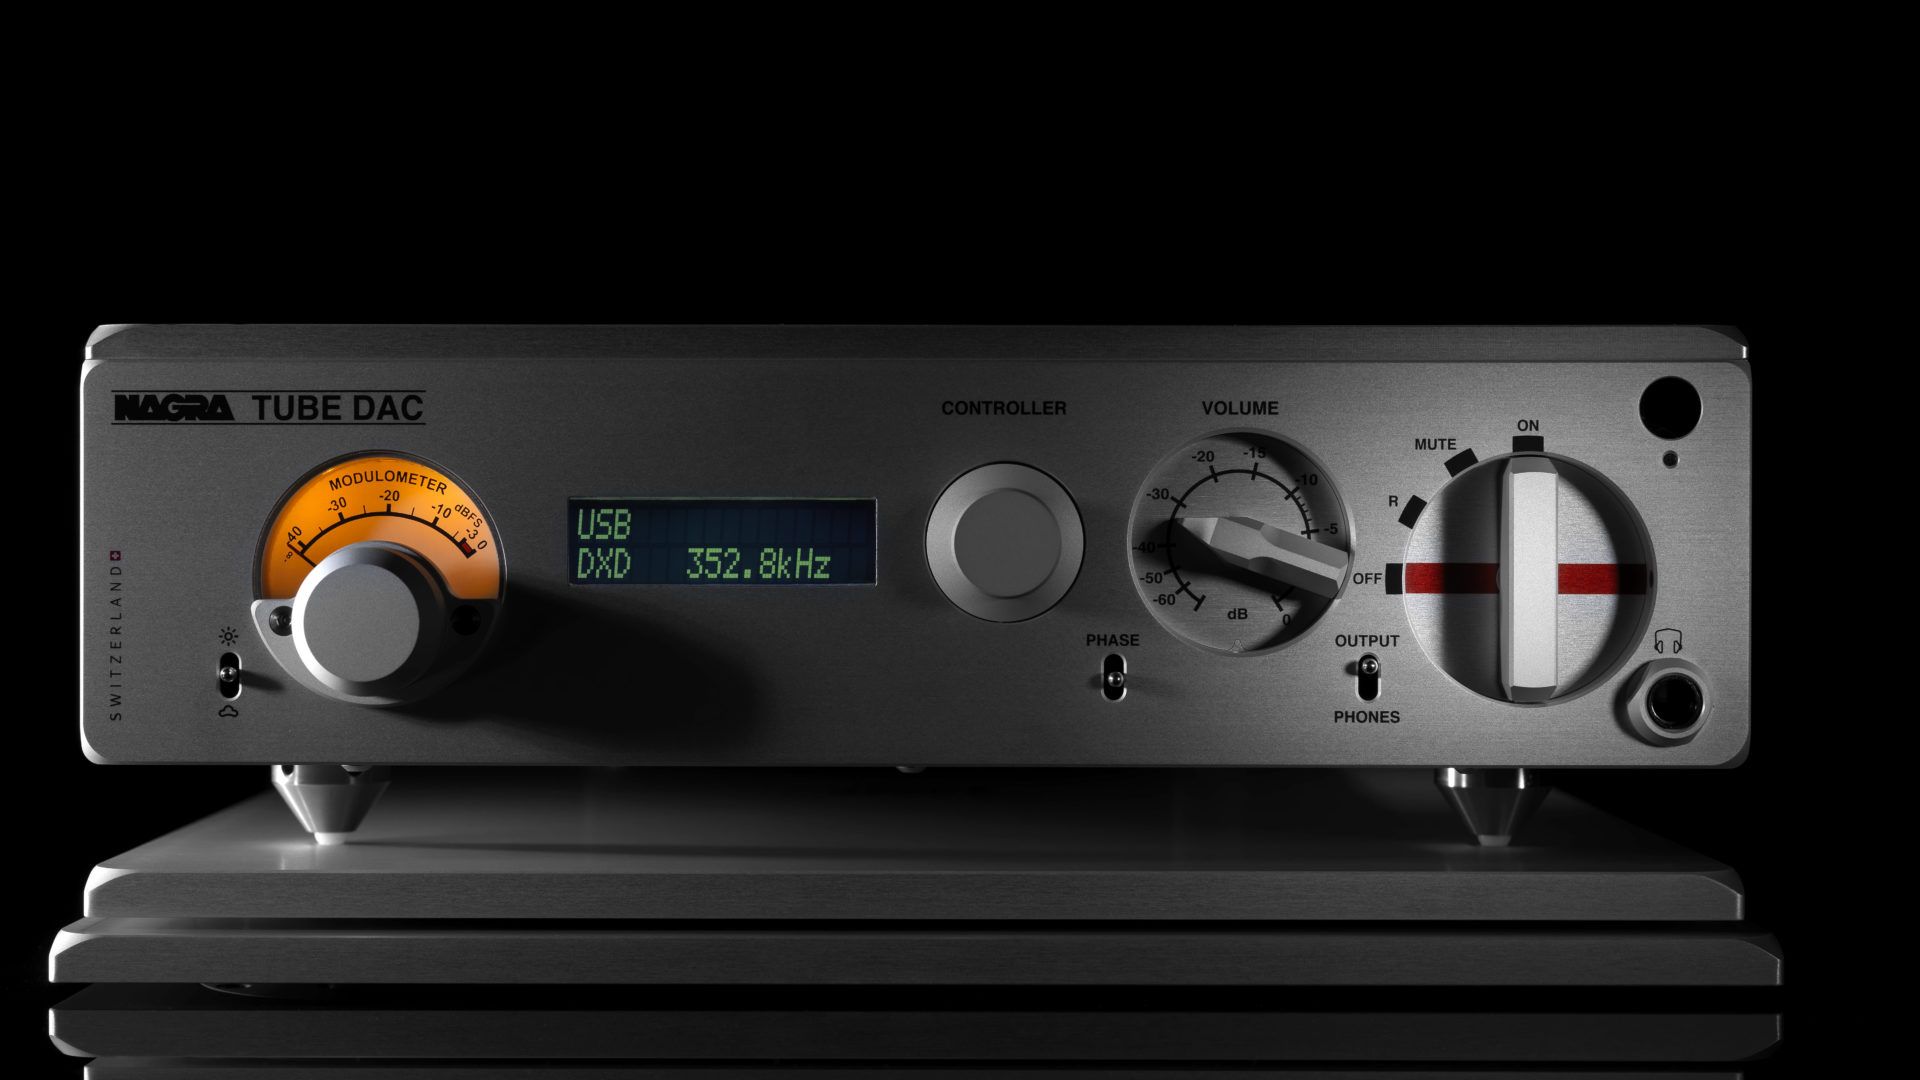 A Guide On How To Effectively Use Digital-to-Analog Converters (DACs)